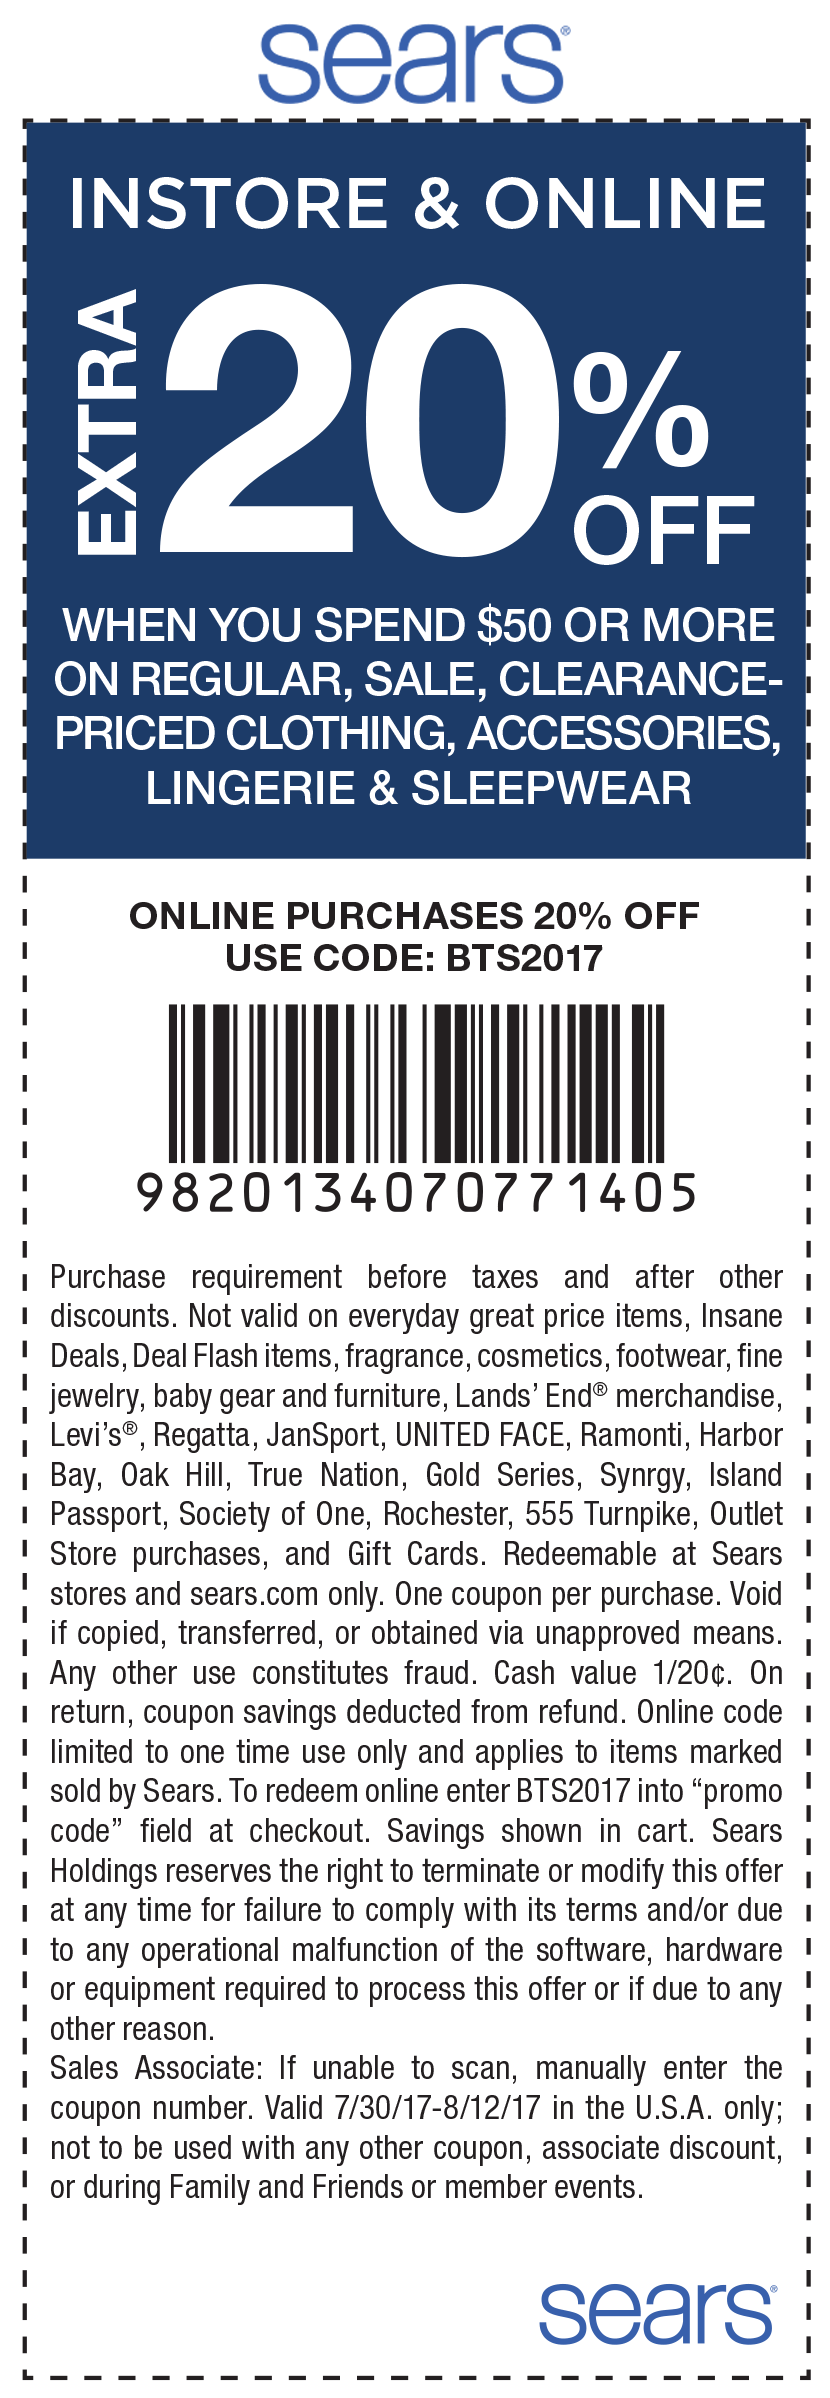 Sears Coupon April 2024 Extra 20% off $50 on apparel at Sears, or online viap romo code BTS2017